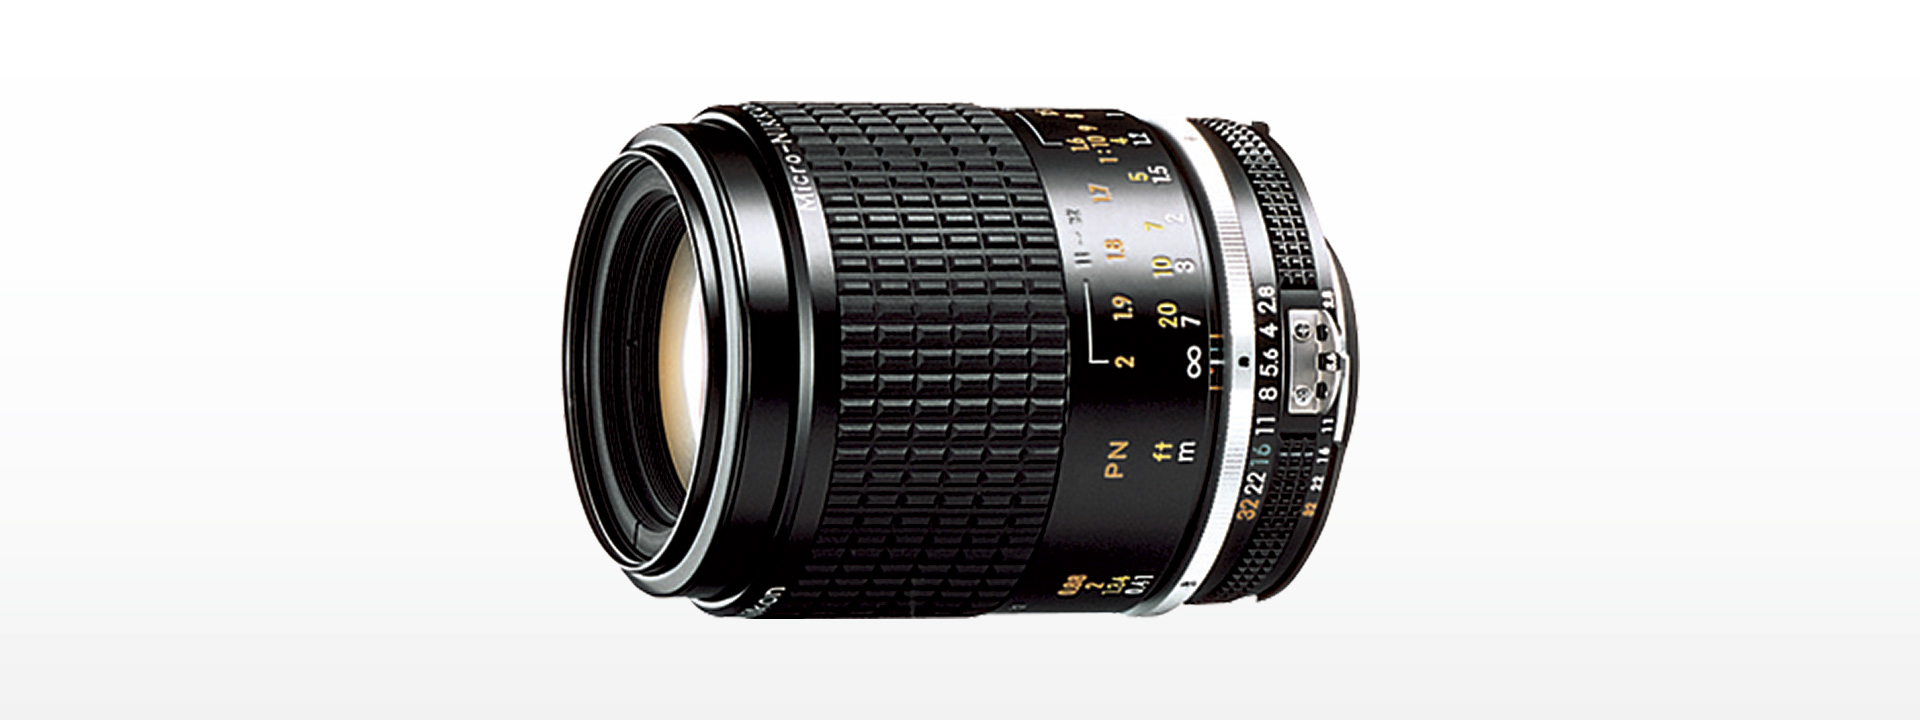 AI Micro-Nikkor 105mm f/2.8S - 概要 | NIKKORレンズ | ニコン 